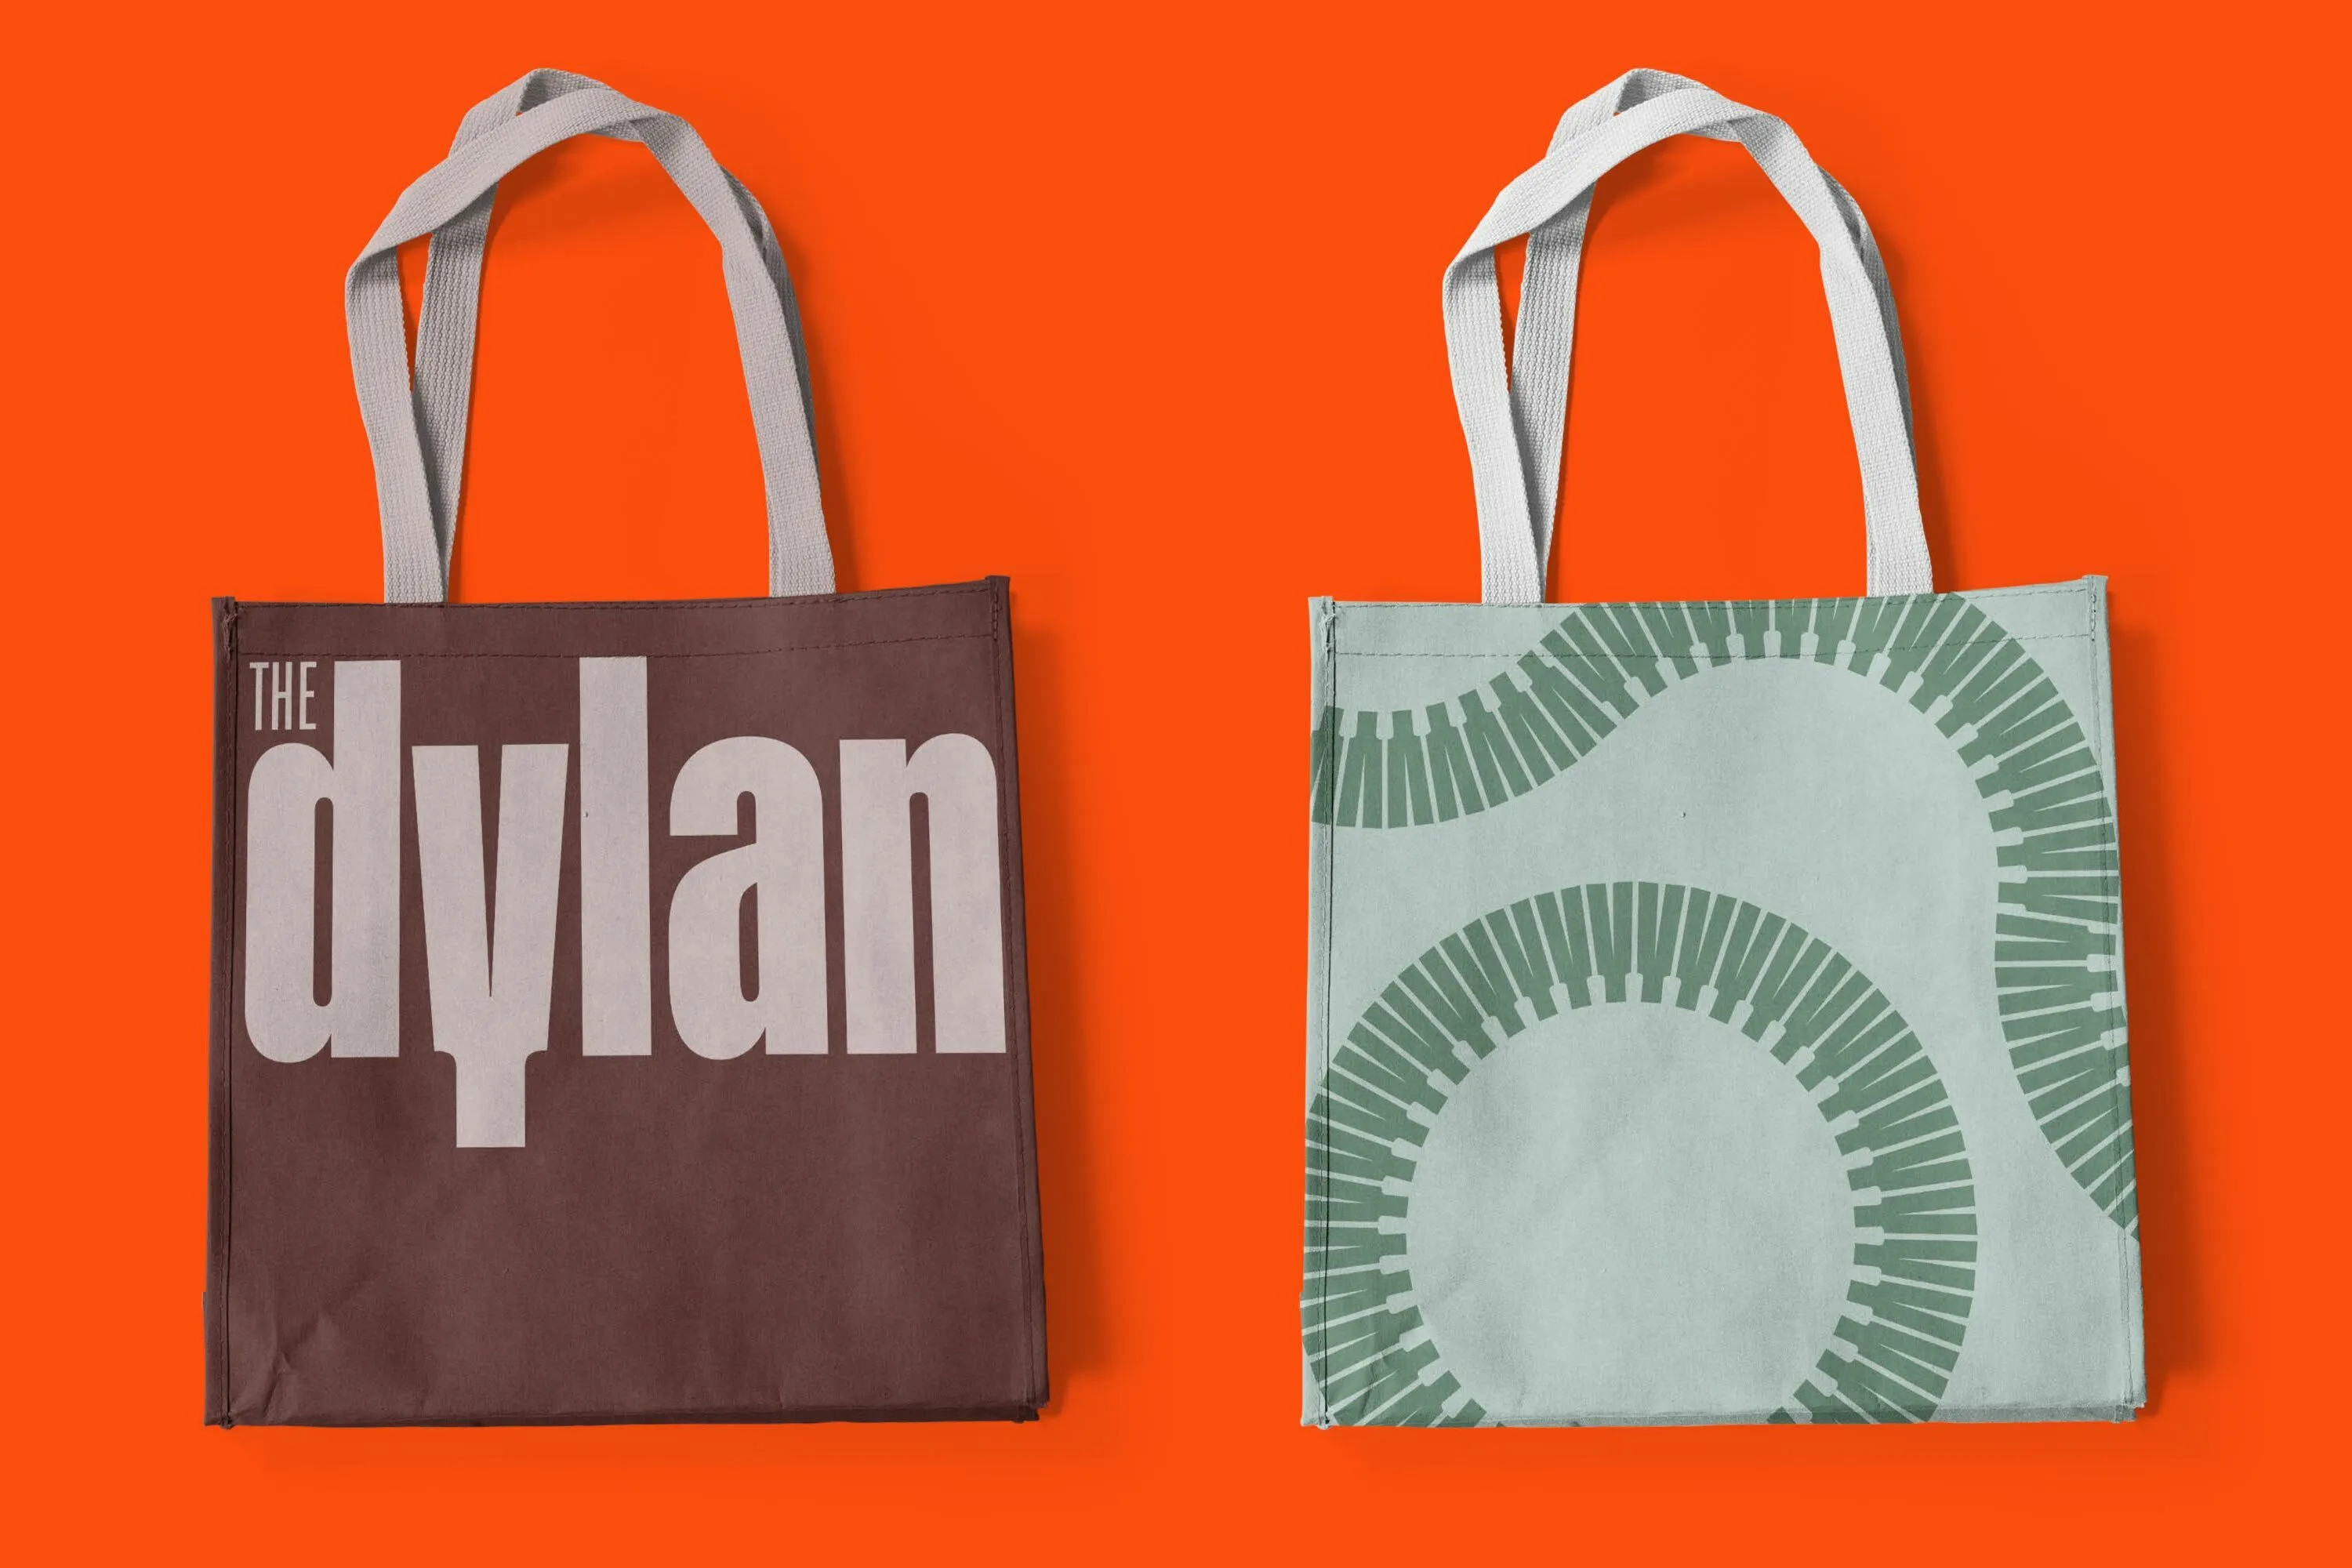 Span The Dylan Tote Bags